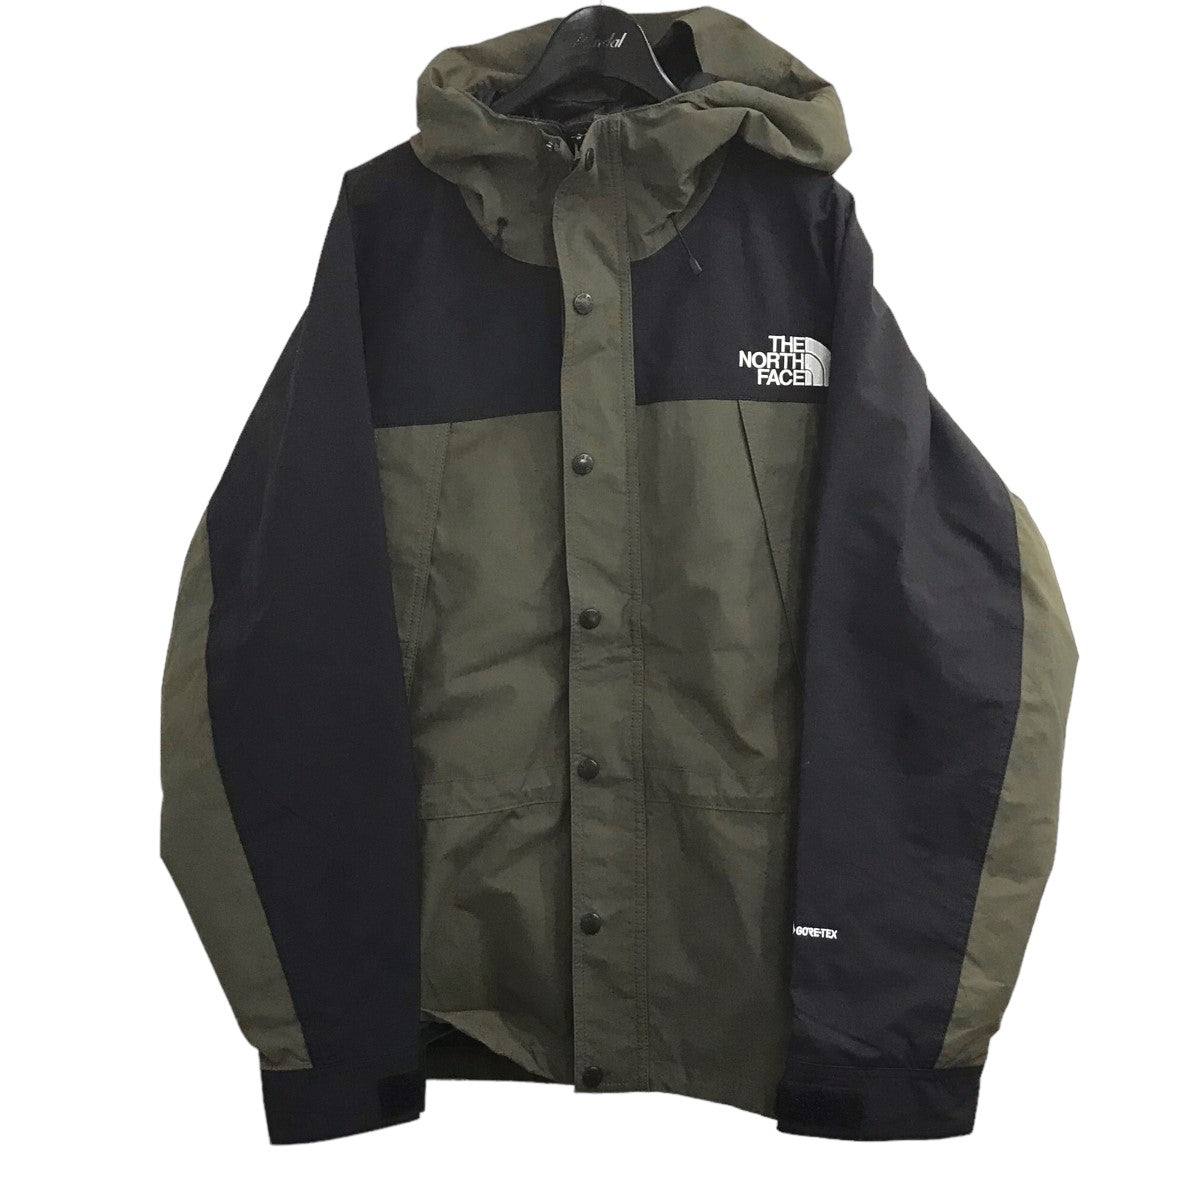 THE NORTH FACE(ザノースフェイス) 「MOUNTAIN LIGHT JACKET ...